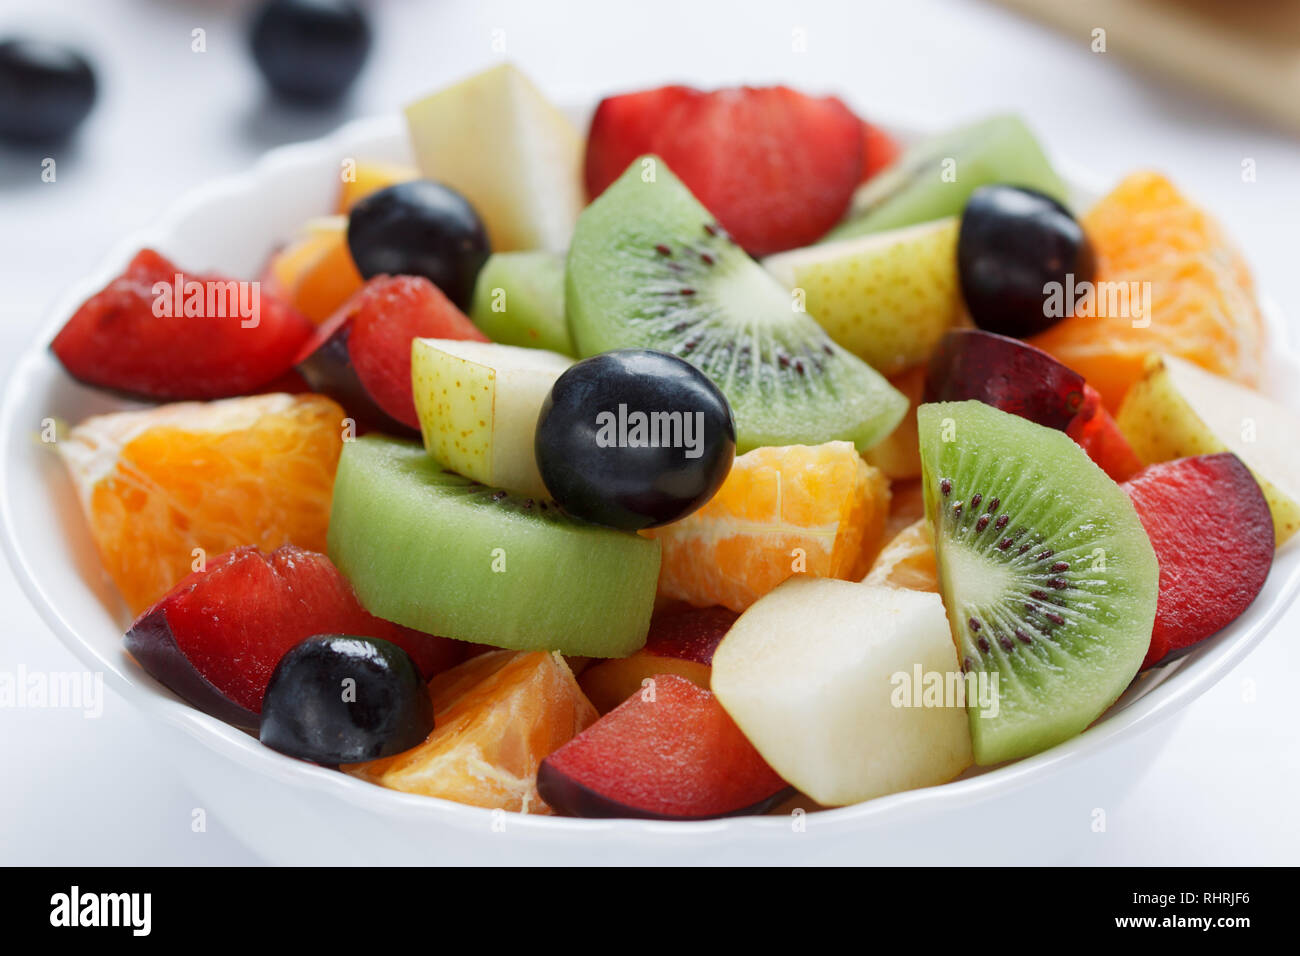 Fresh salad from kiwi, oranges, plums and other fruits close up. Healthy lifestyle. Vegetarian food. Stock Photo